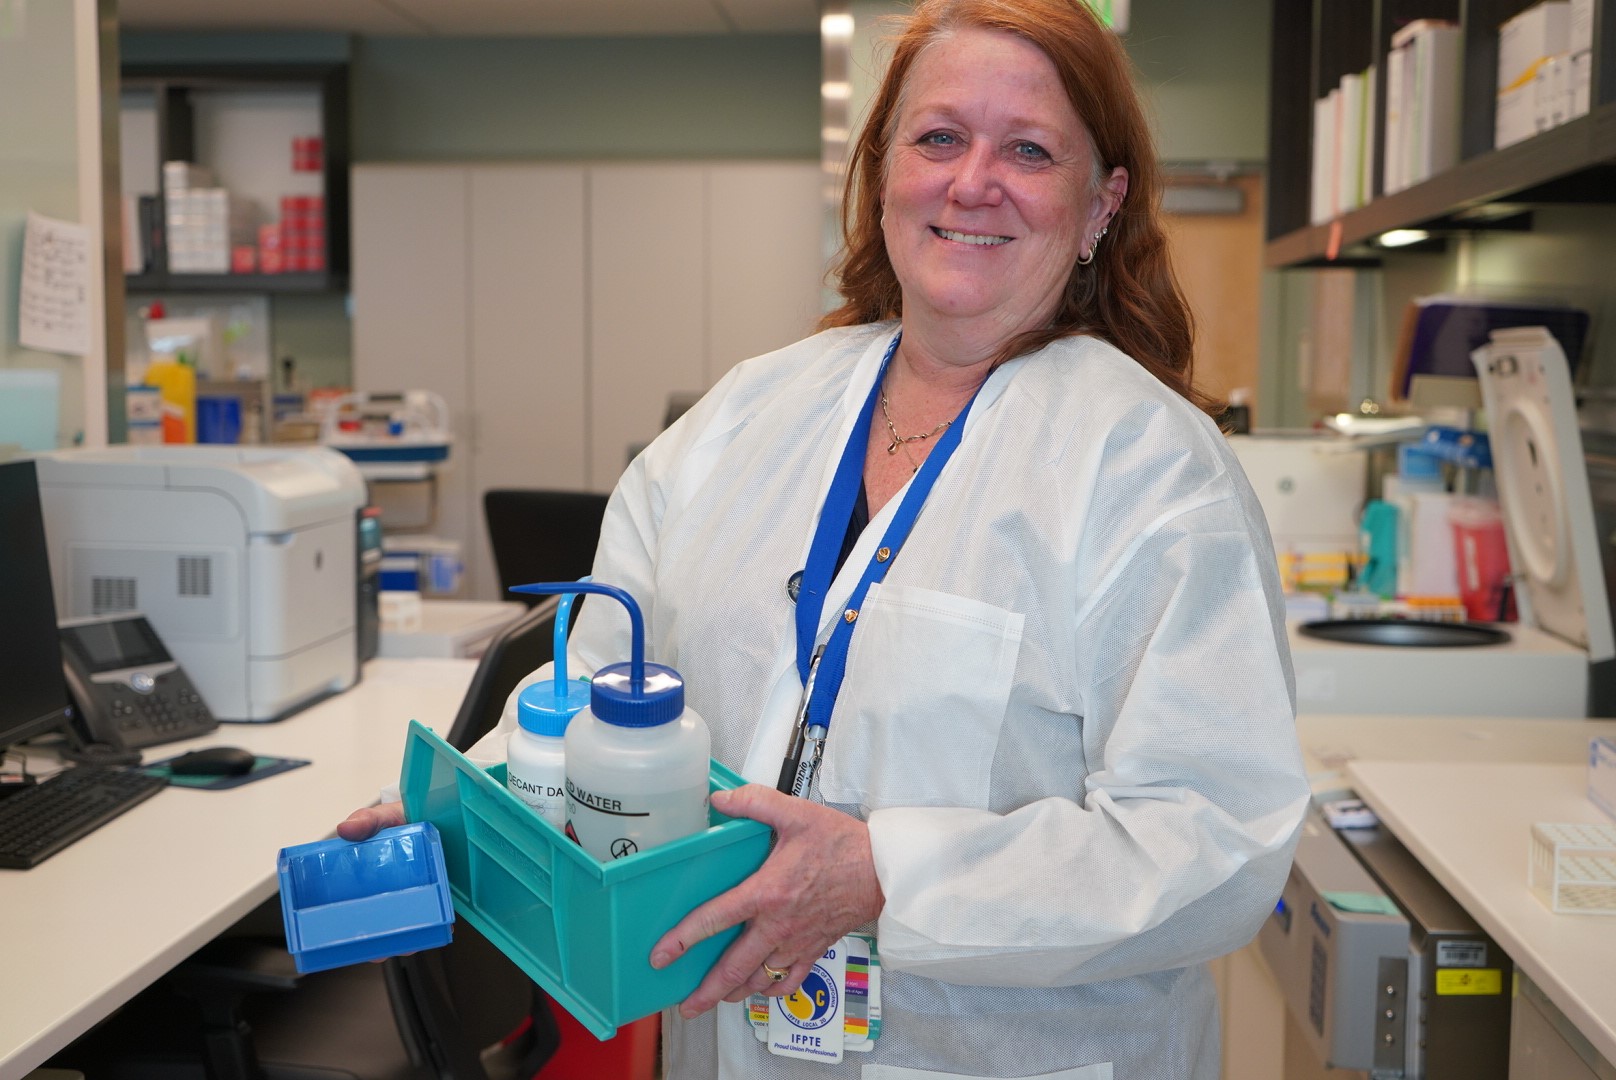 A Caucasian woman in a white lab coat holds lab materials in a clinical laboratory setting